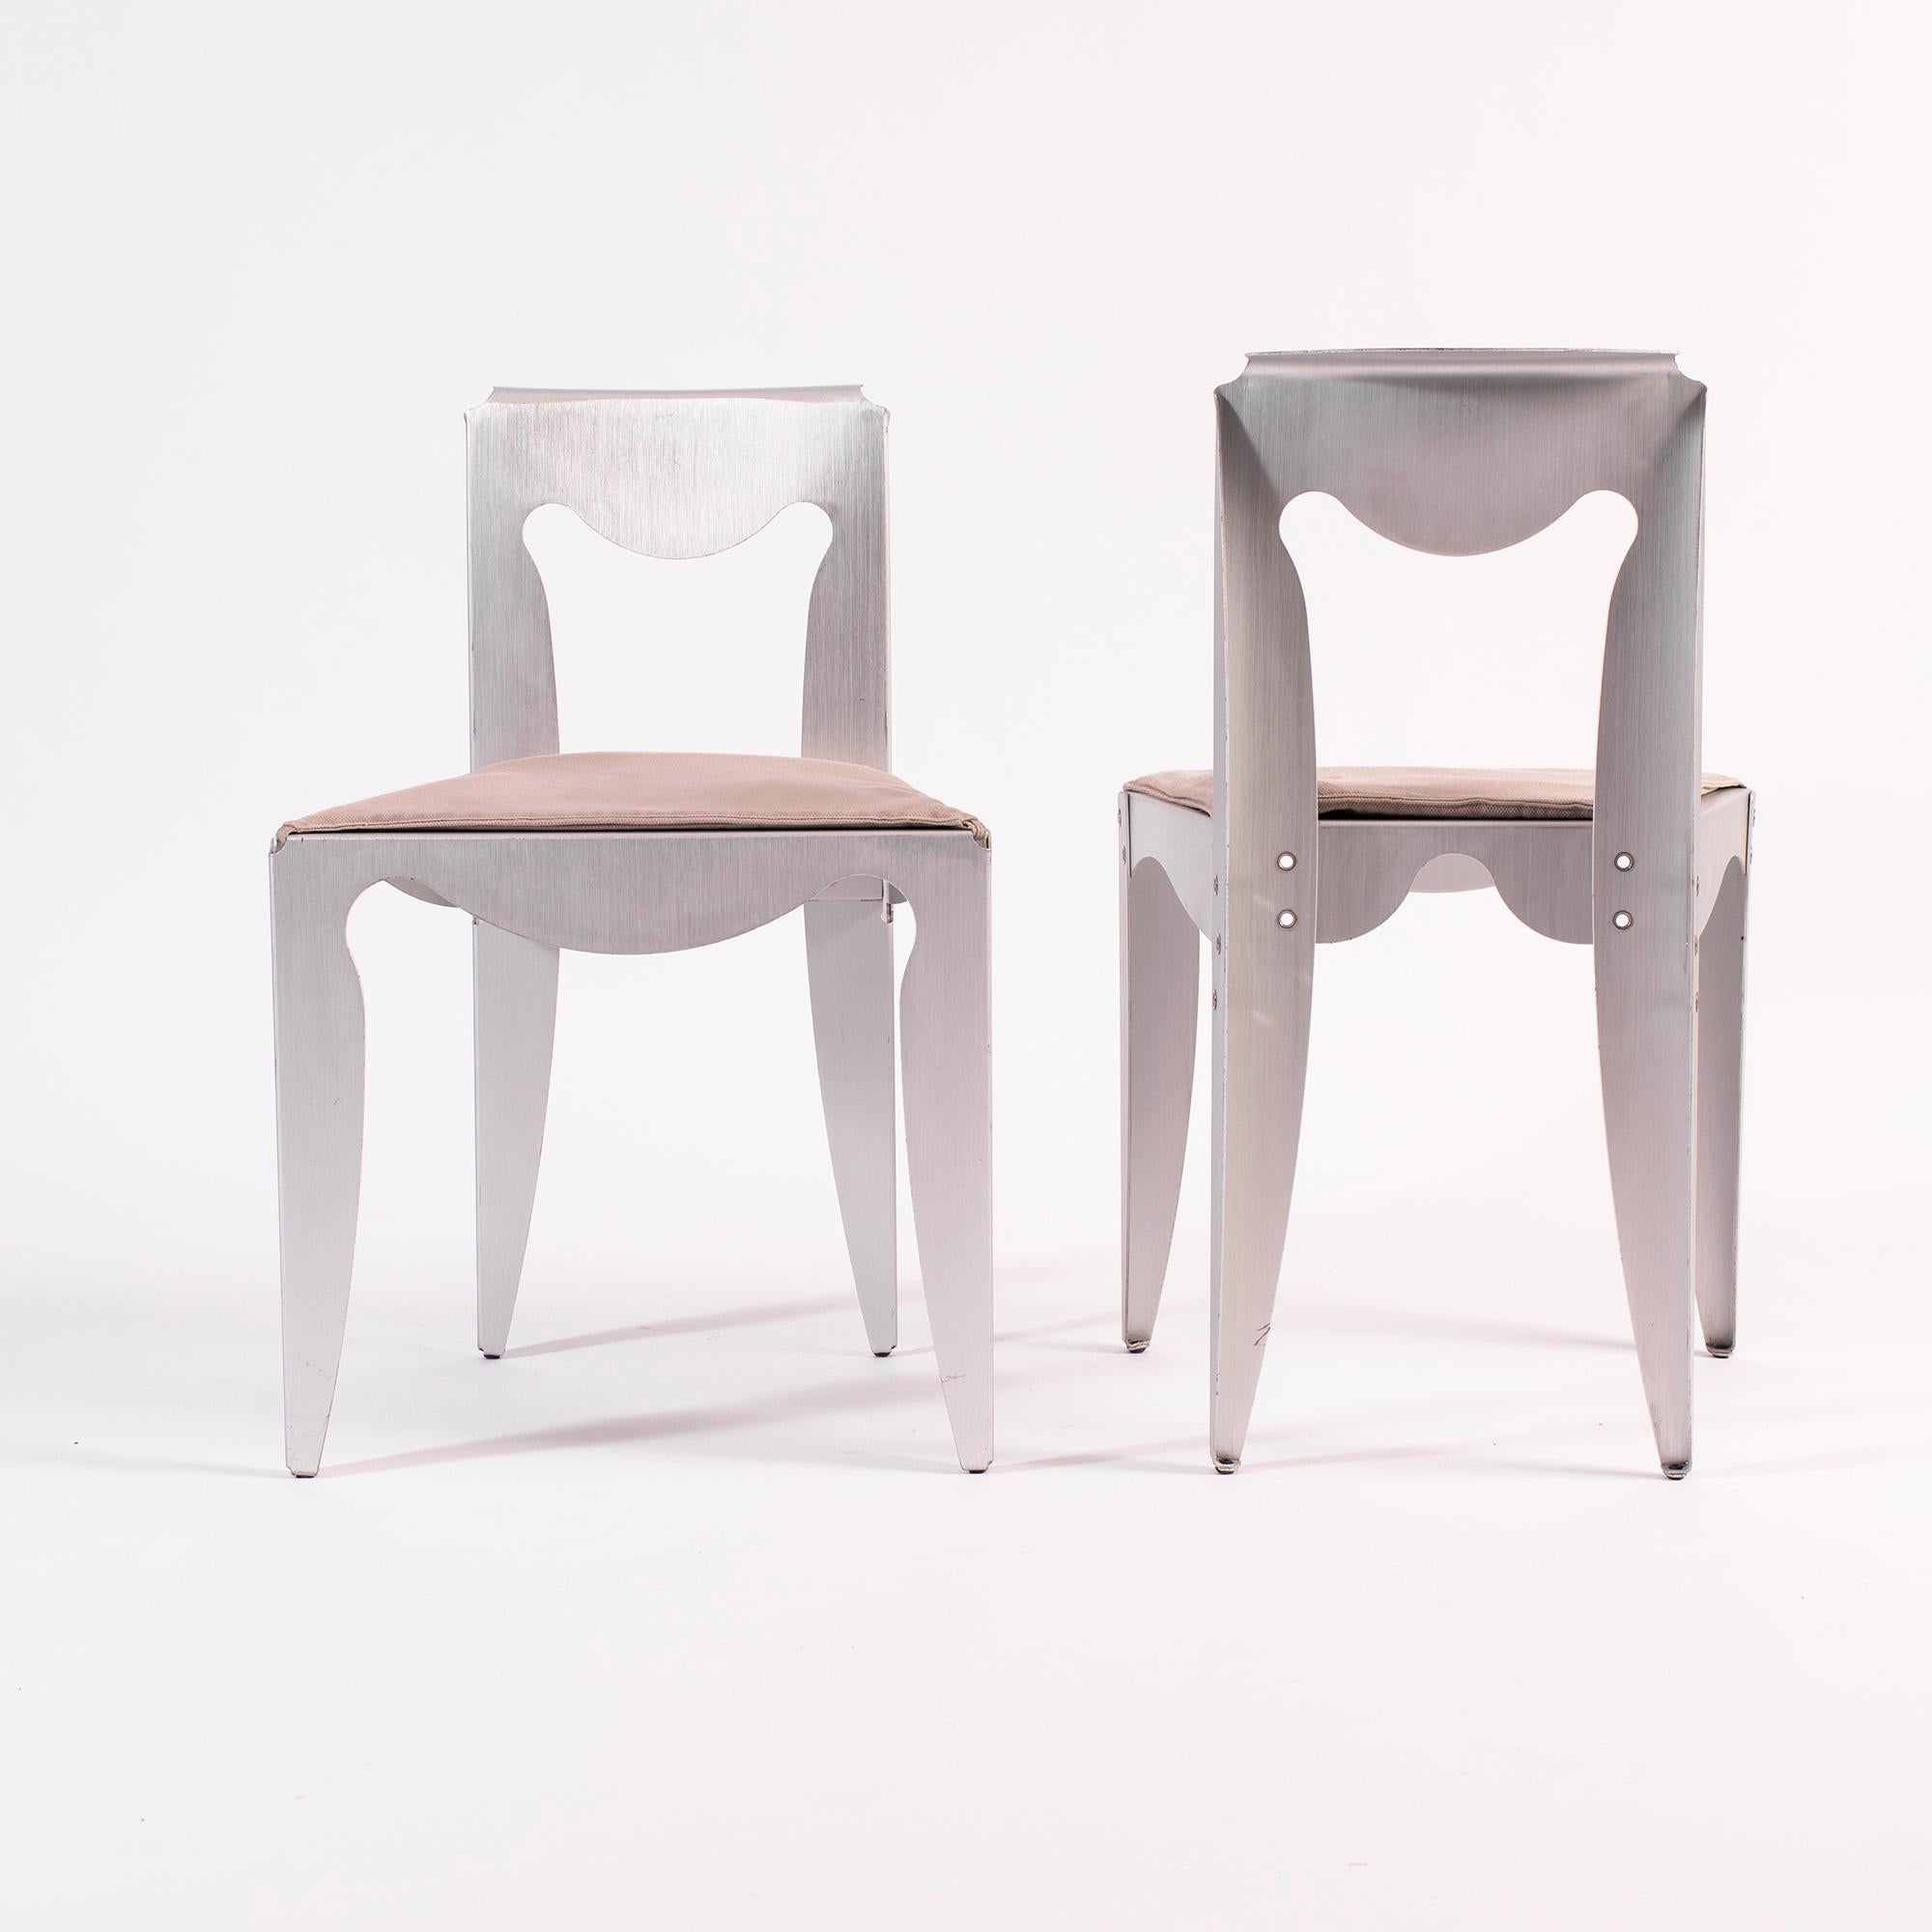 Sculptural chairs designed by the Italian duo Afra & Tobia Scarpa.
The structure is in aluminium with satined anodized finish and the seat is covered in the original fabric upholstery. They wear the manufacturer’s label on the back of the seat.